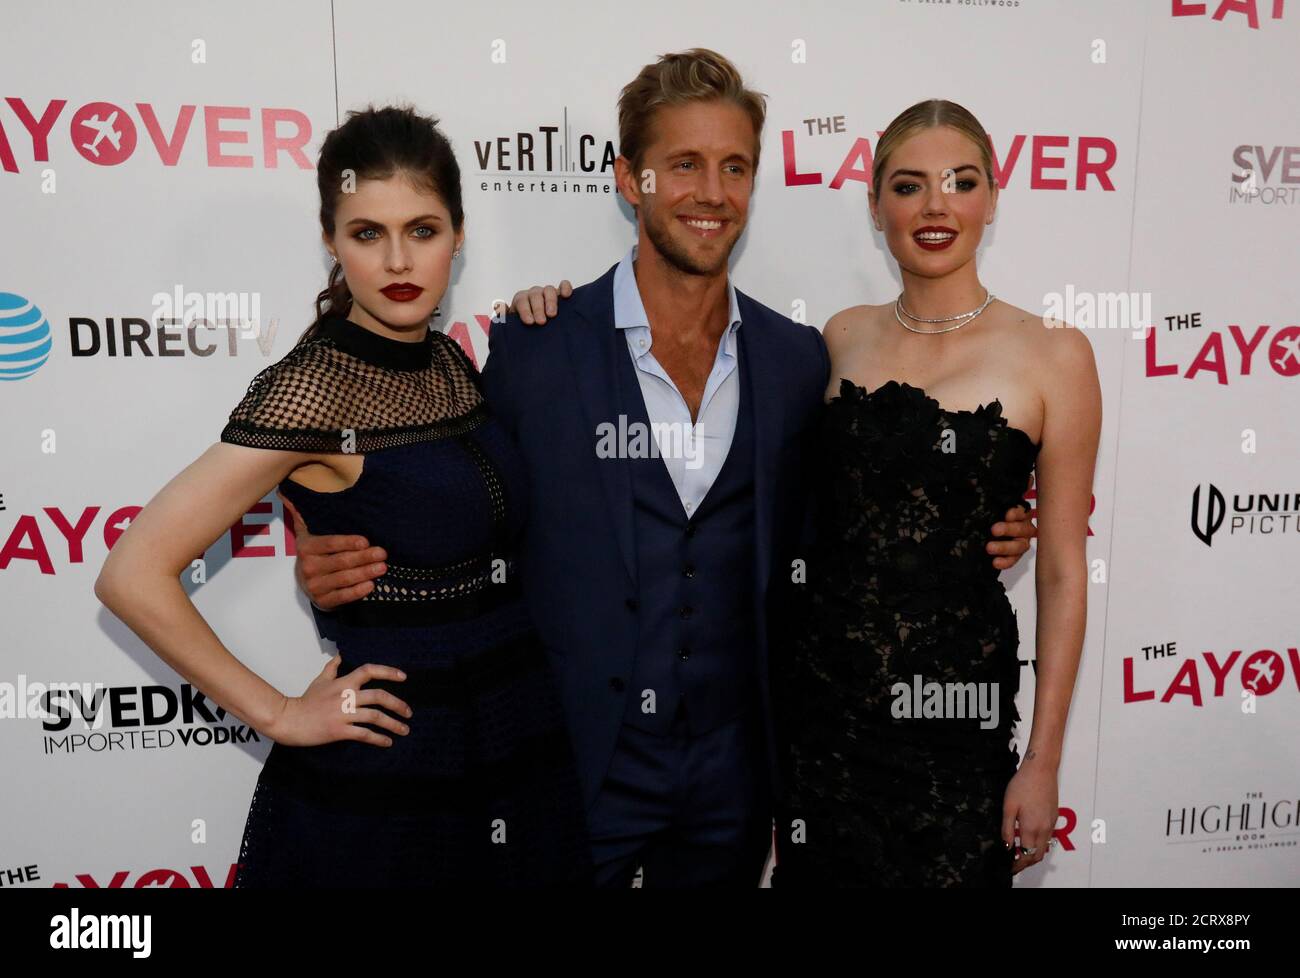 Cast members Alexandra Daddario (L), Matt Barr and Kate Upton pose at the  premiere for "The Layover" in Los Angeles, California, U.S., August 23,  2017. REUTERS/Mario Anzuoni Stock Photo - Alamy